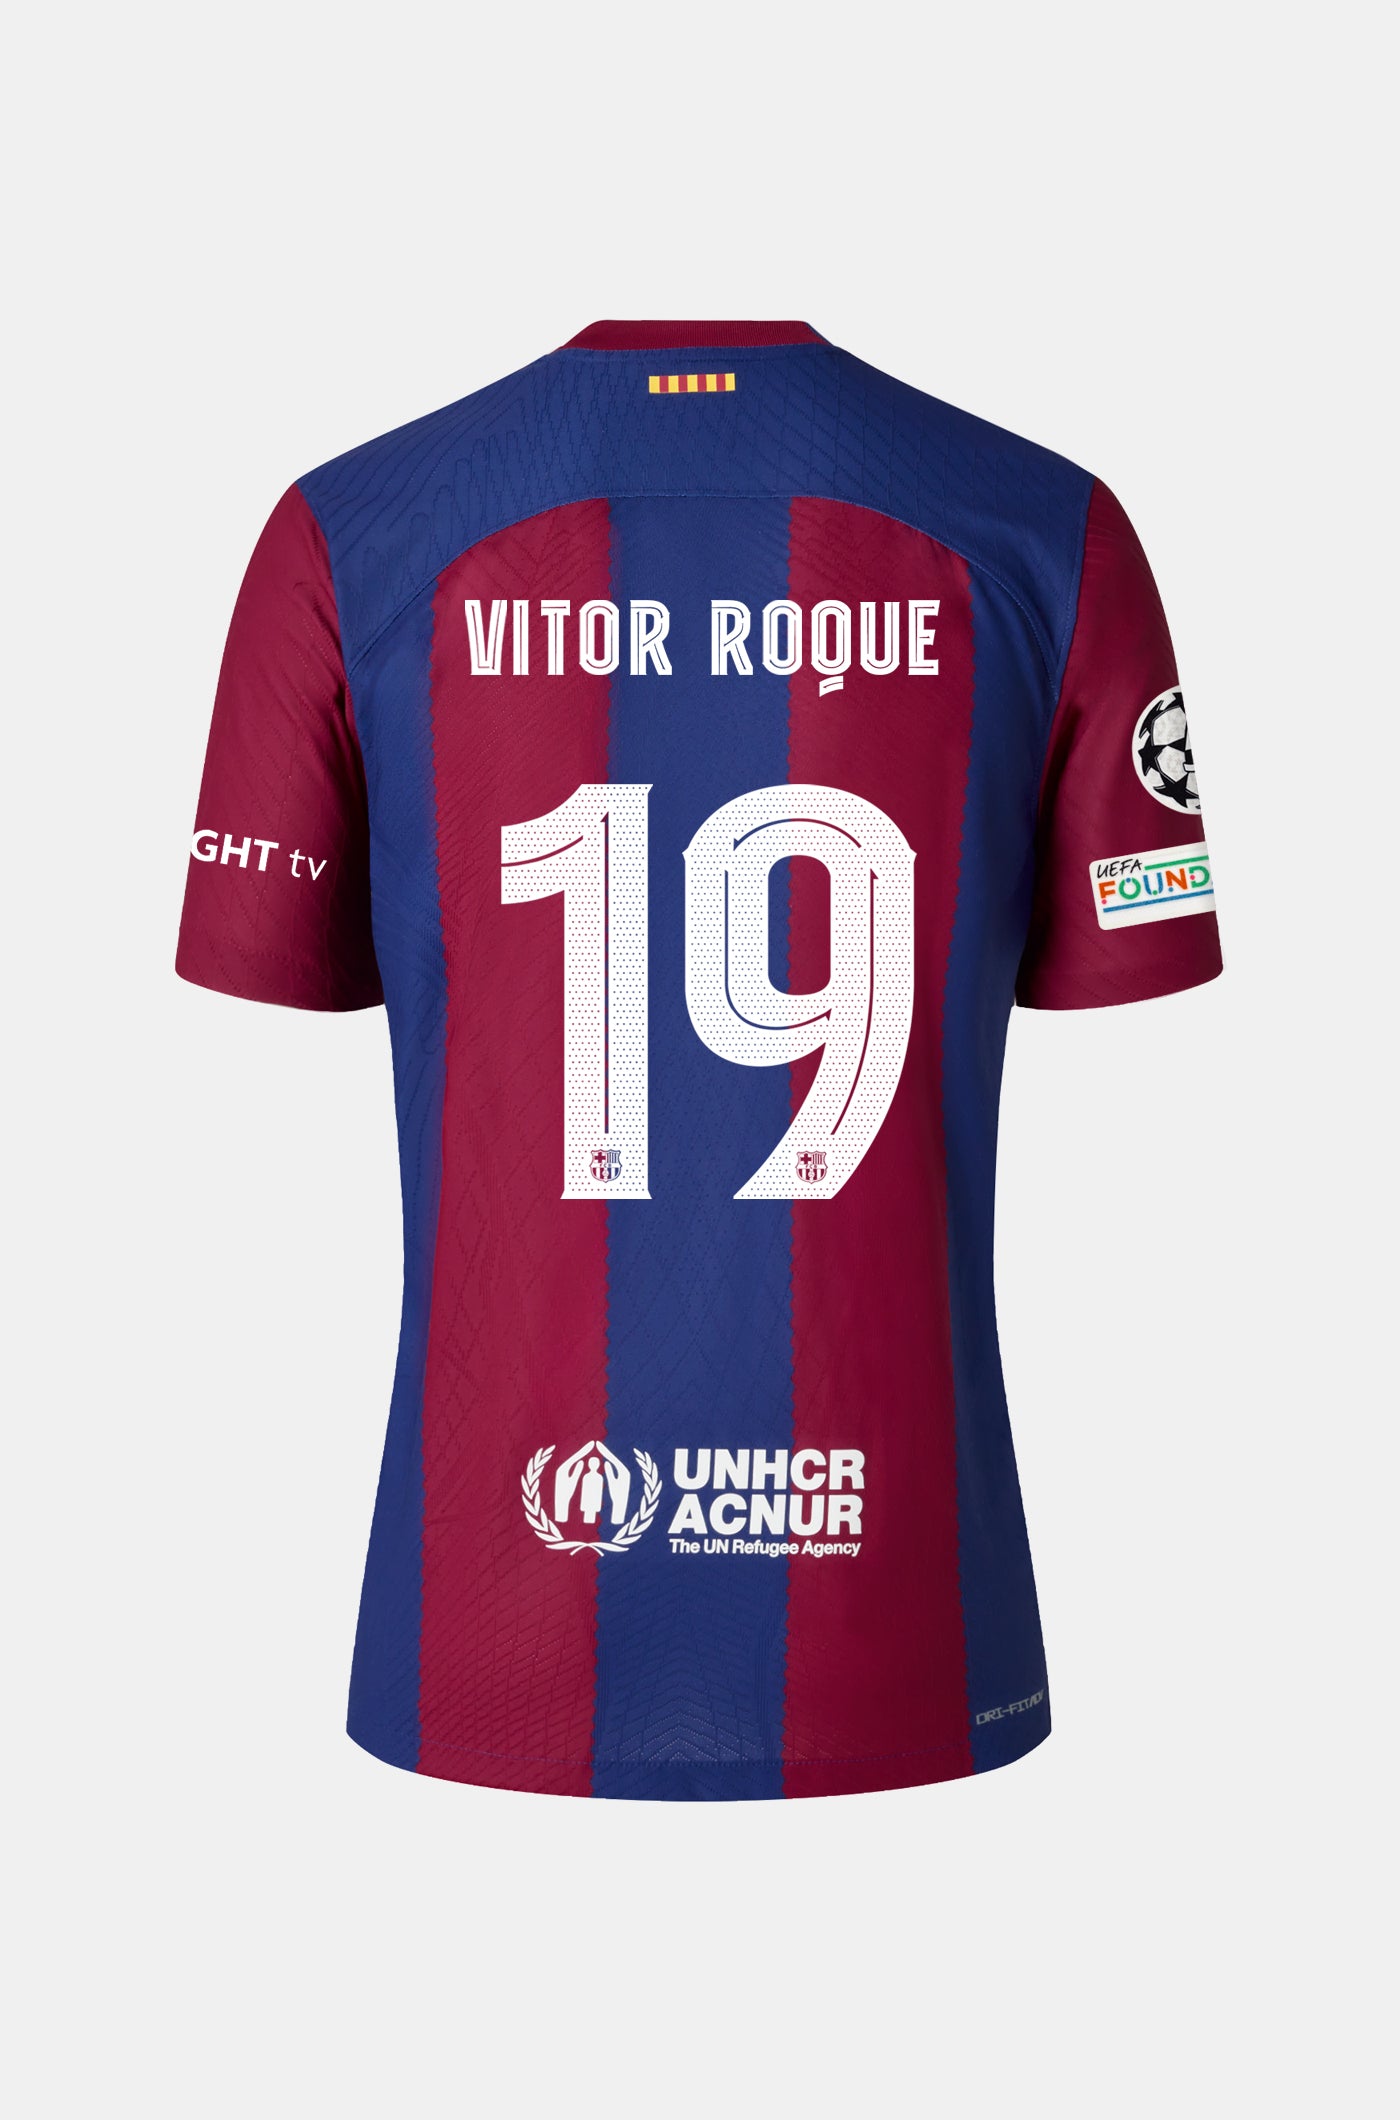 UCL FC Barcelona home shirt 23/24 - Long-sleeve - VITOR ROQUE